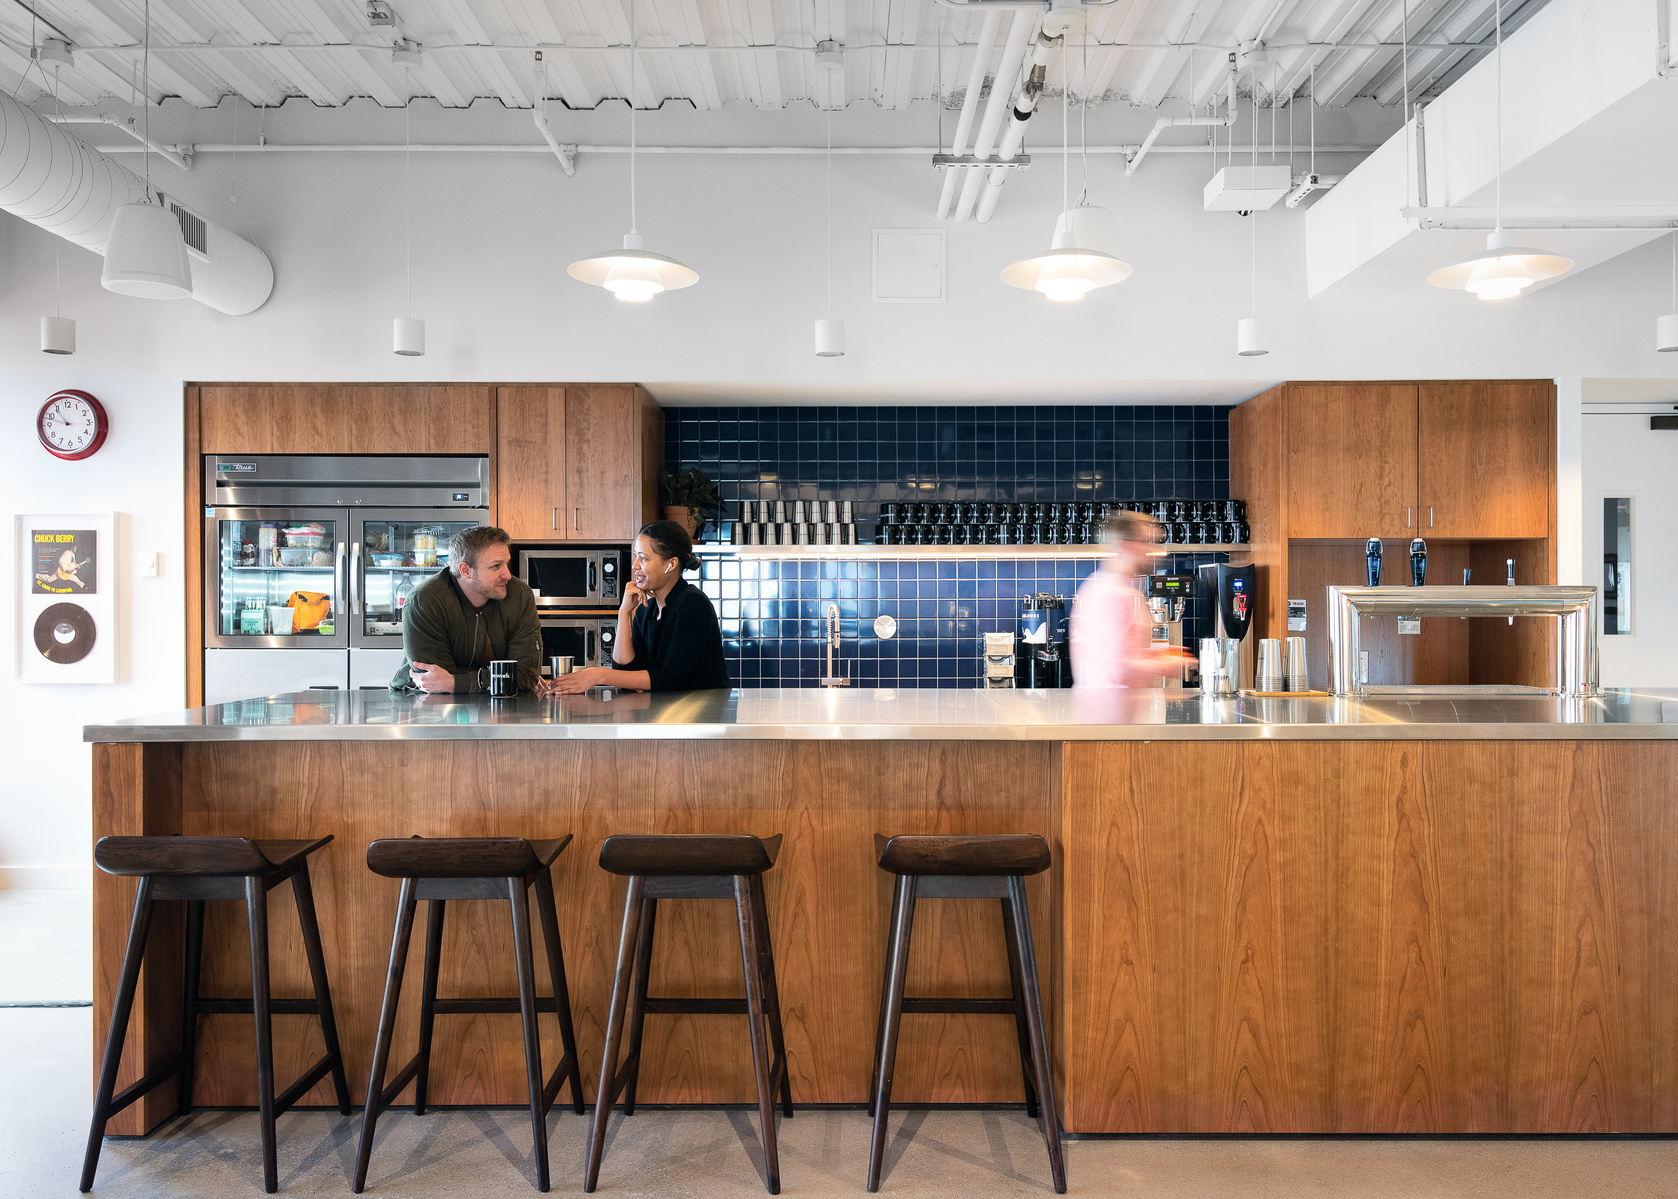 Commercial Architecture Photography of a WeWork Space, located in St. Louis, Missouri.  Members interacting around a coffee bar.